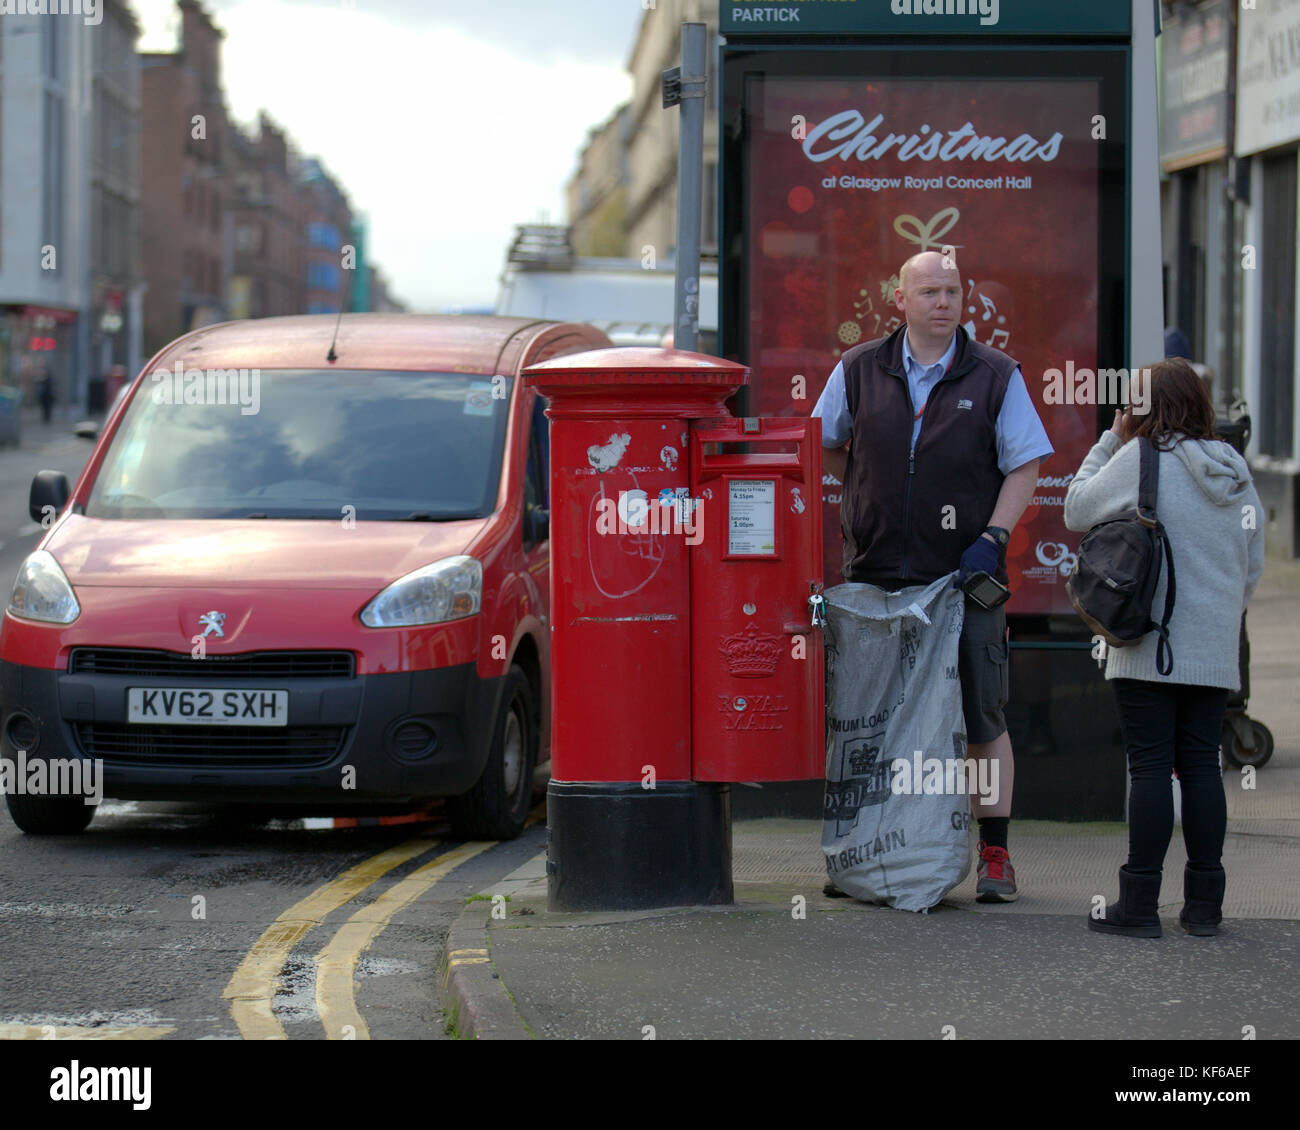 Royal Mail postman collecting letters street red postbox van talking to customer christmas poster Stock Photo